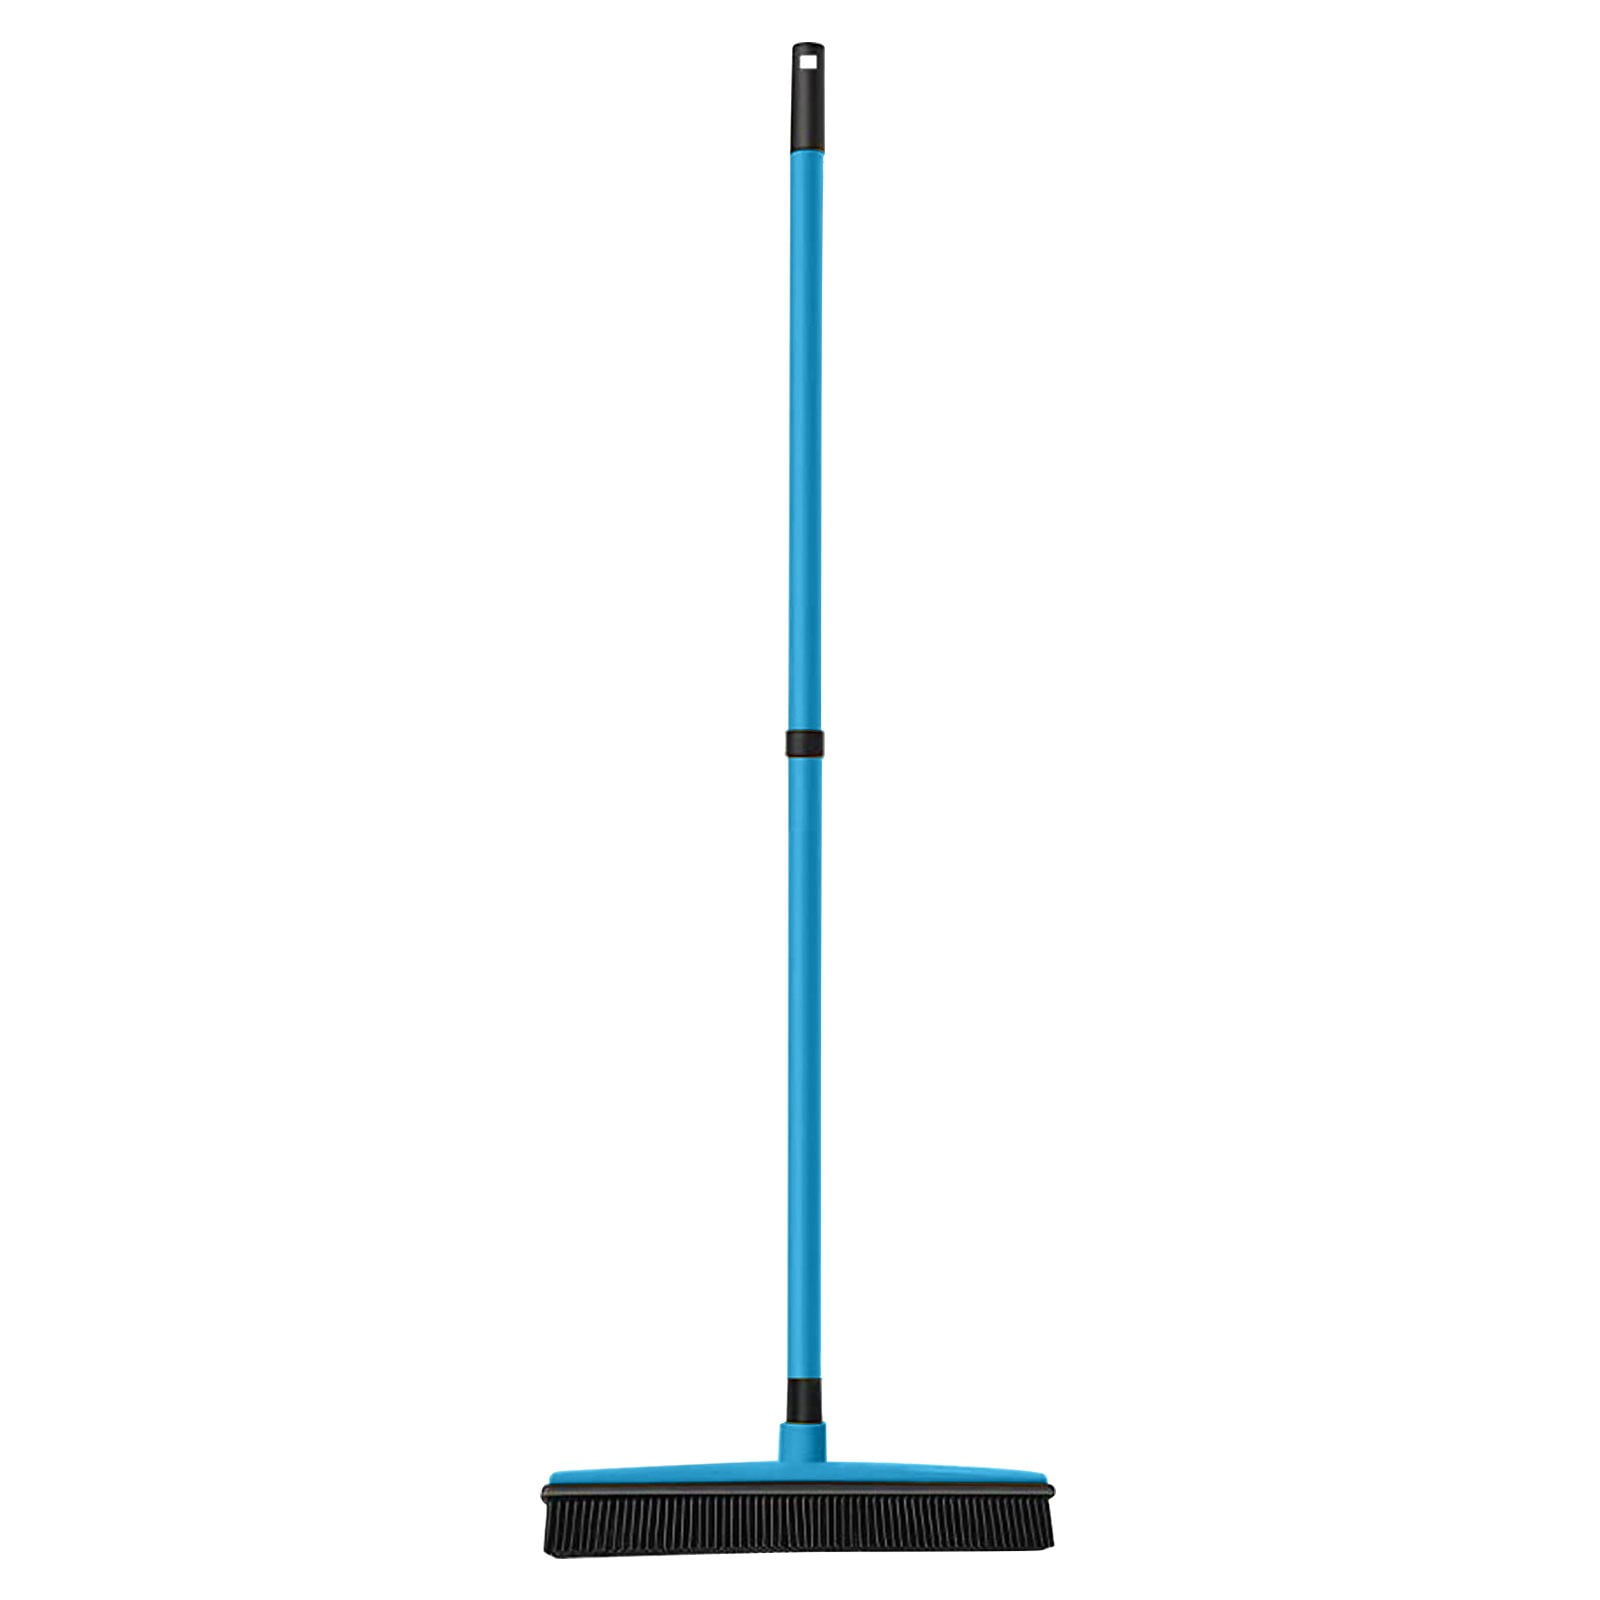 KeFanta Rubber Floor Brushes, Artificial Grass Cleaner Brush with 150 cm Long Handle,Indoor Broom with Squeegee Edge for Carpet Pet Hair Sweeping,Push